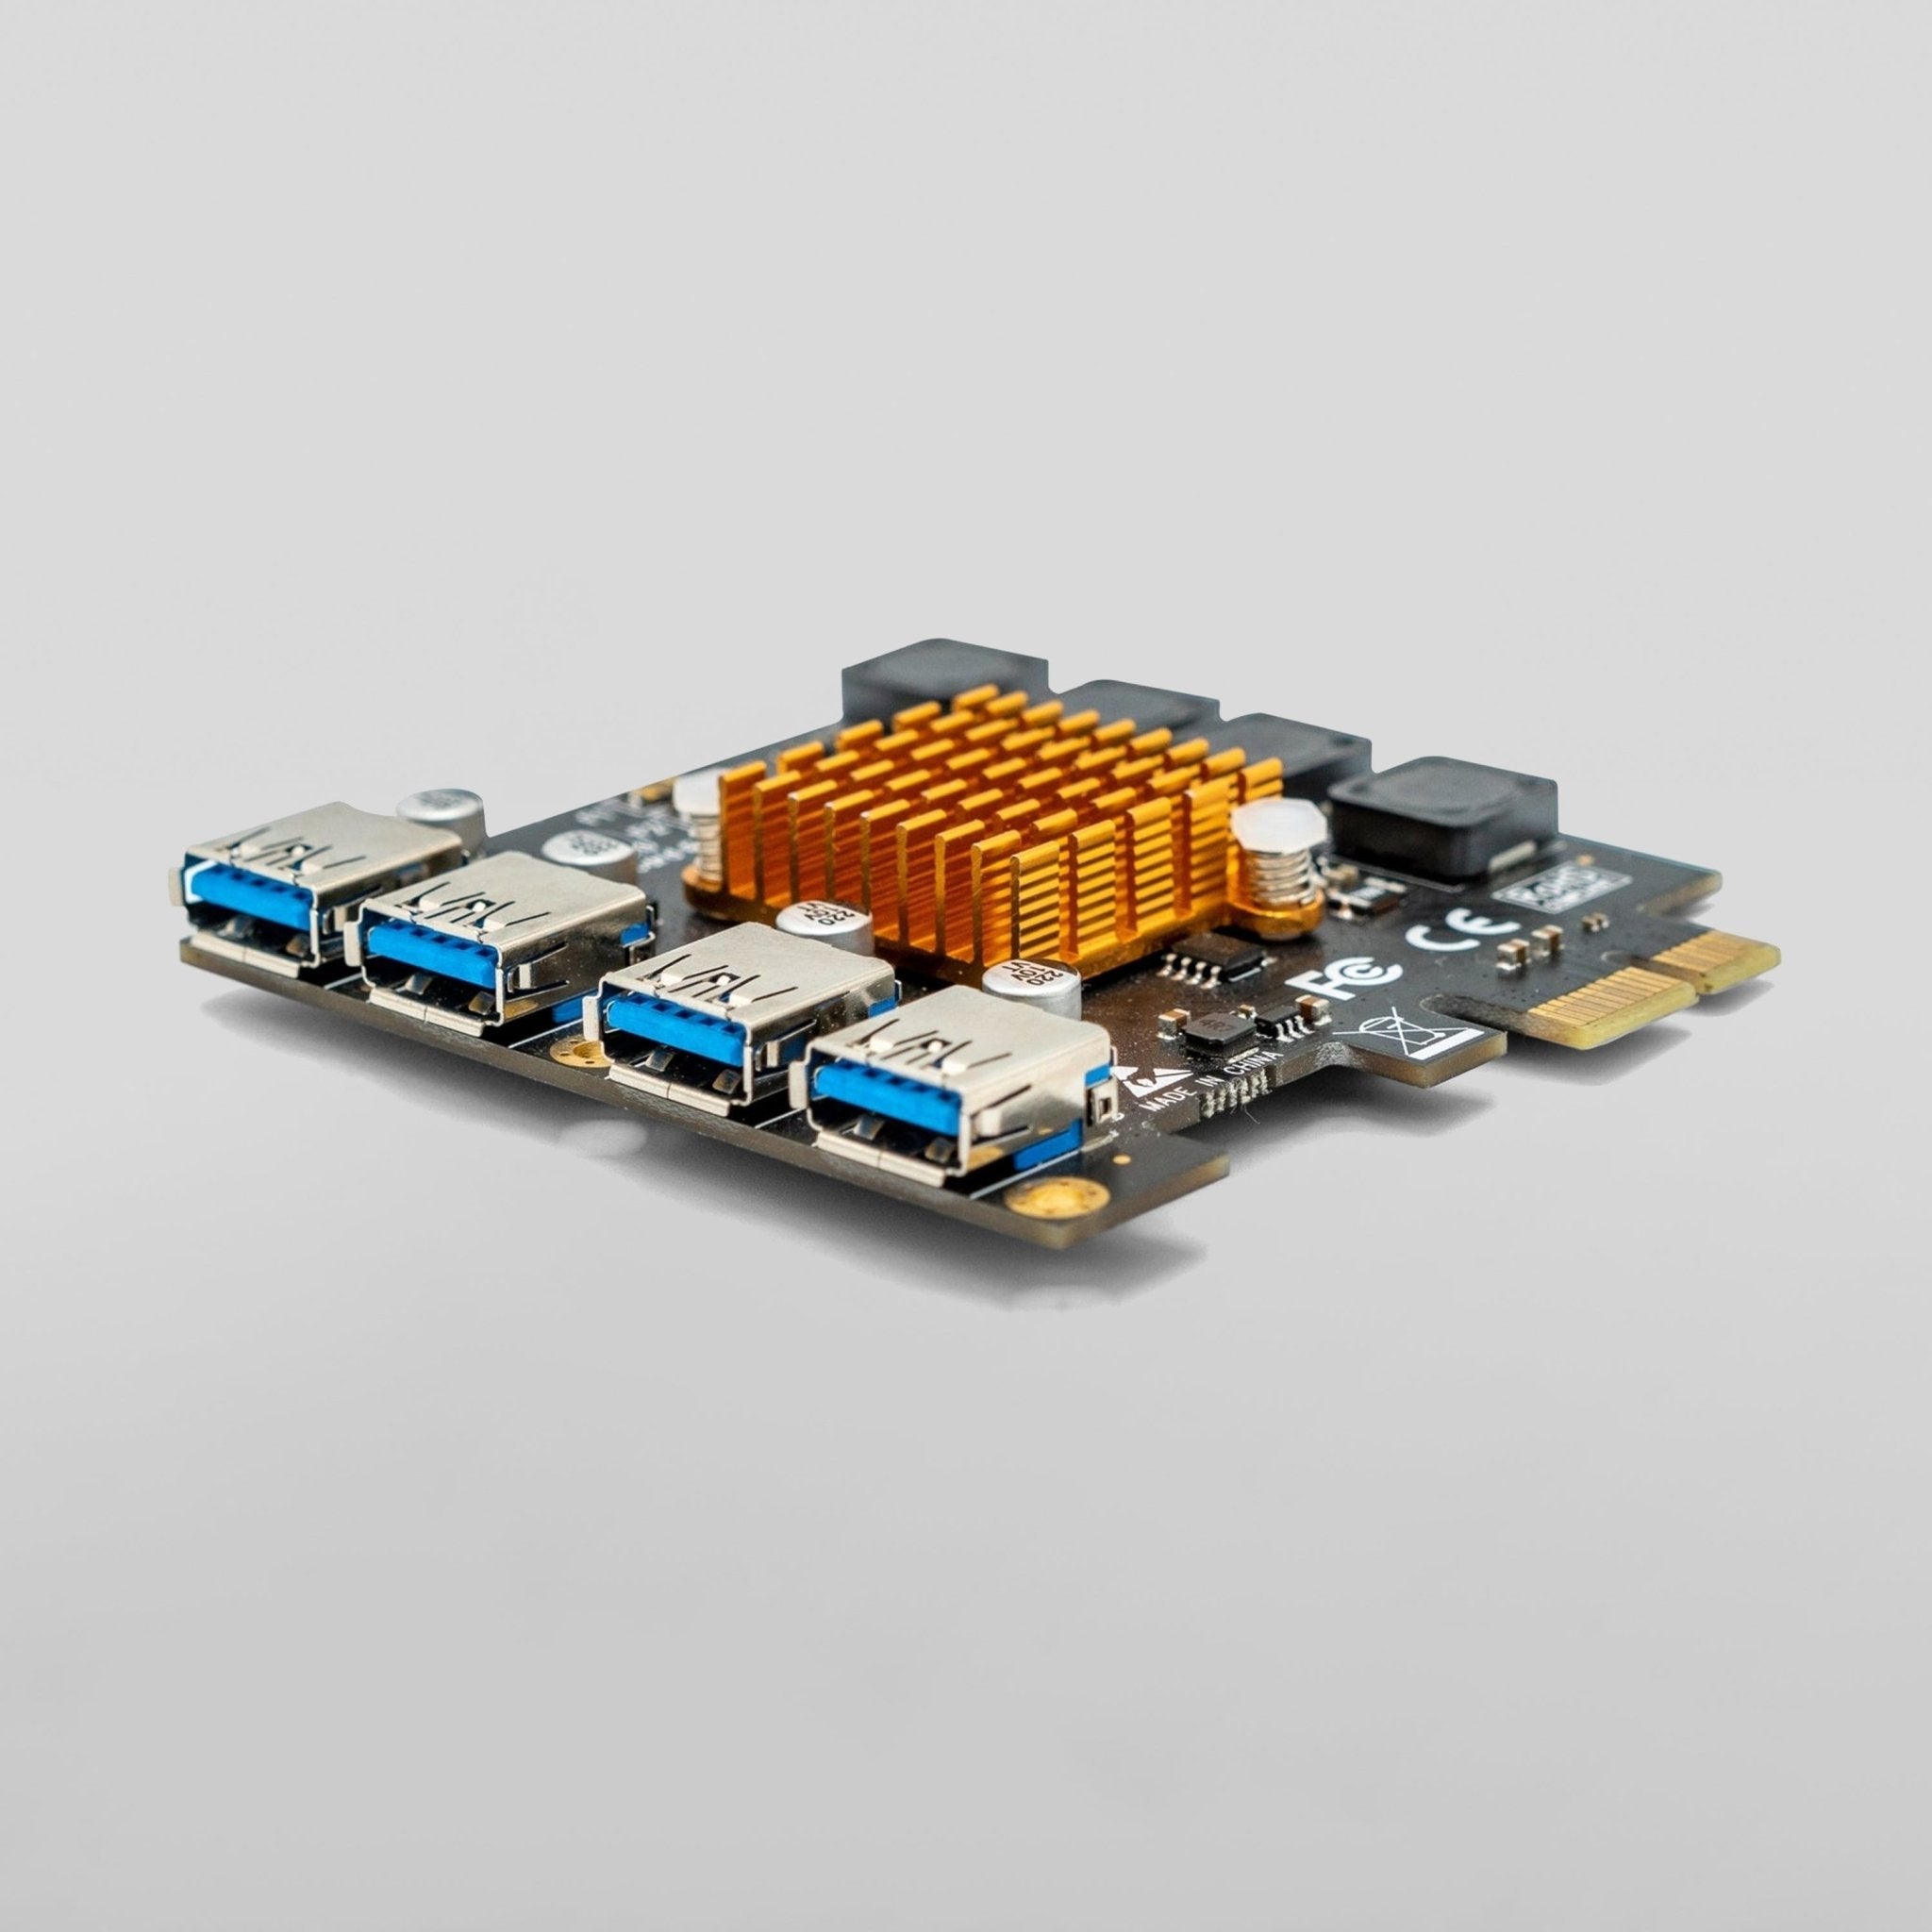 PCIe to 4 Channel USB Adapter - Zima Store Online